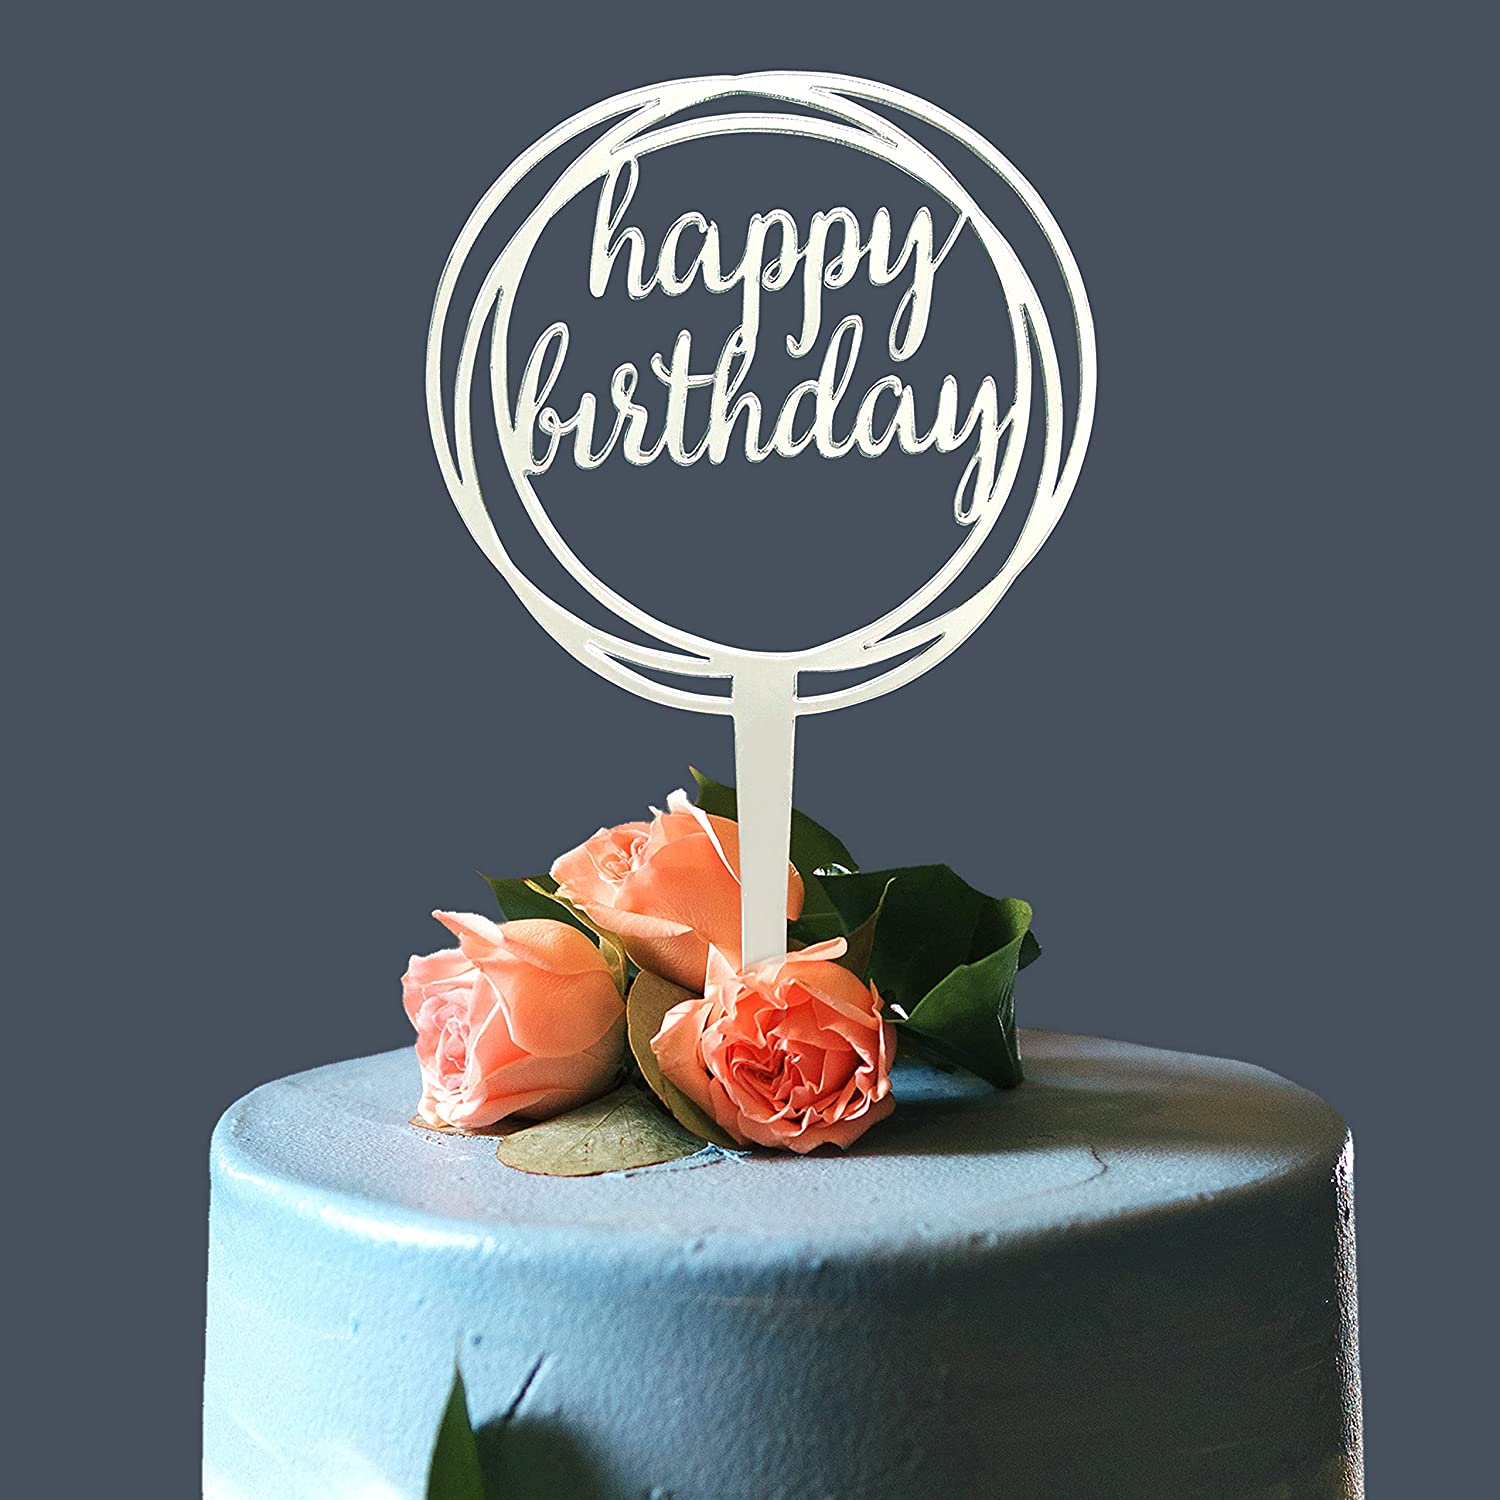 Small chocolate cake with a birthday candle - a Royalty Free Stock Photo  from Photocase